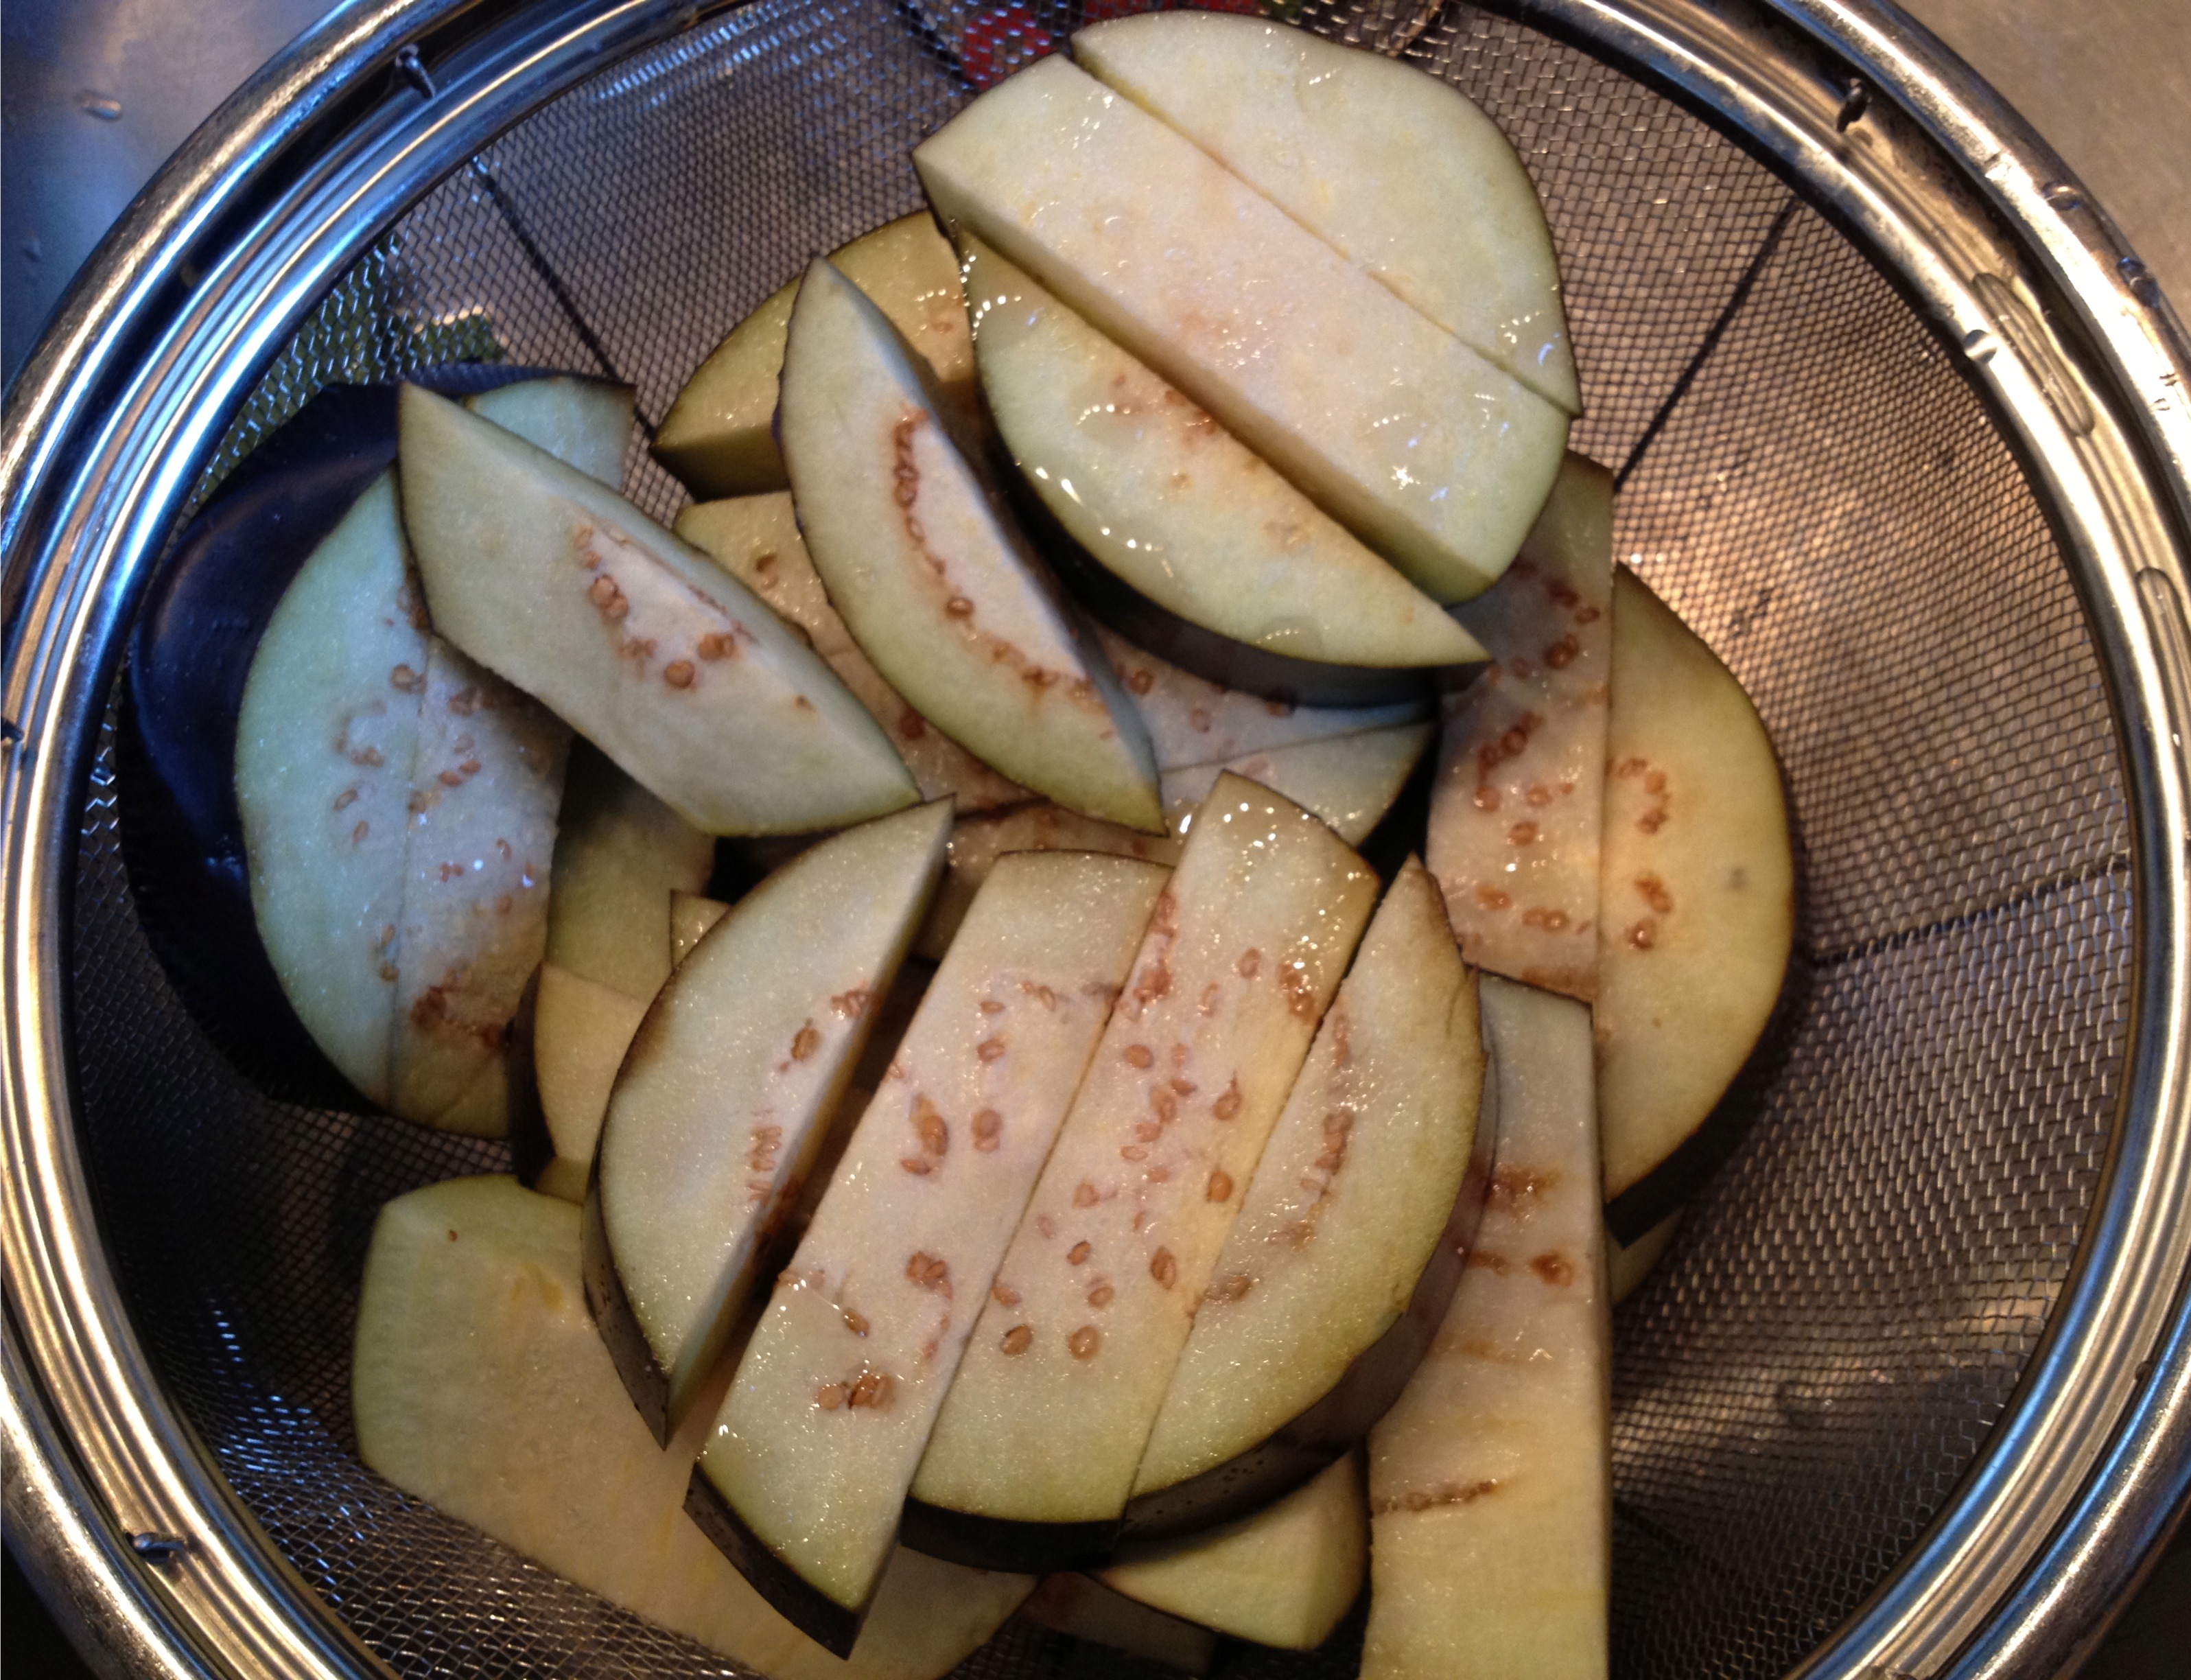 Salted eggplant in a colander.